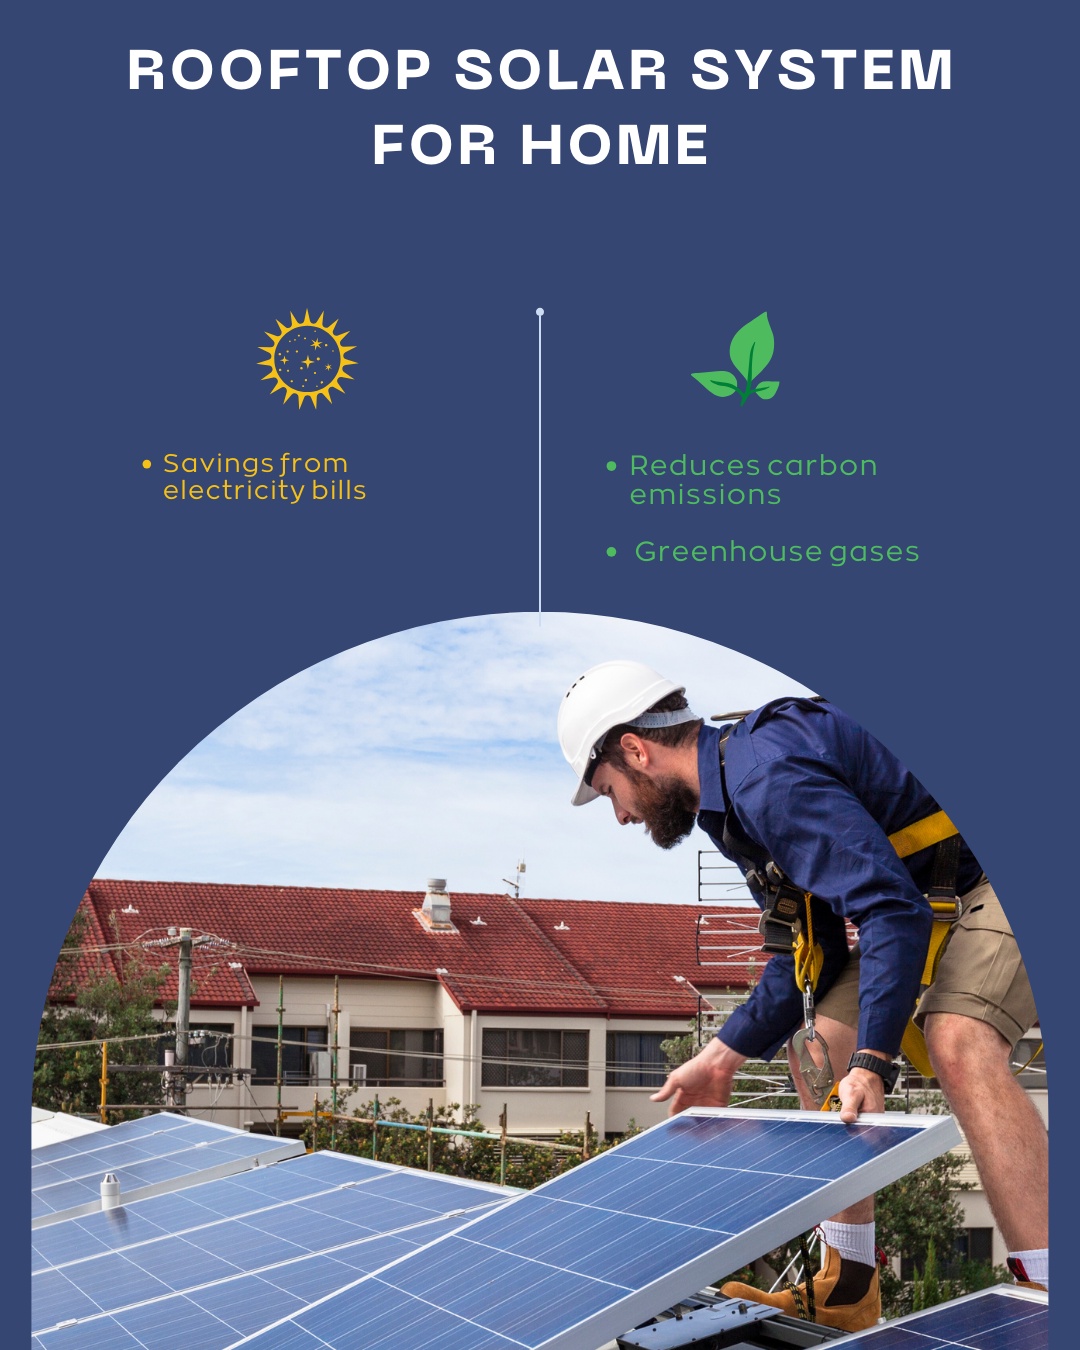 The Complete Guide to Rooftop Solar Systems for Home